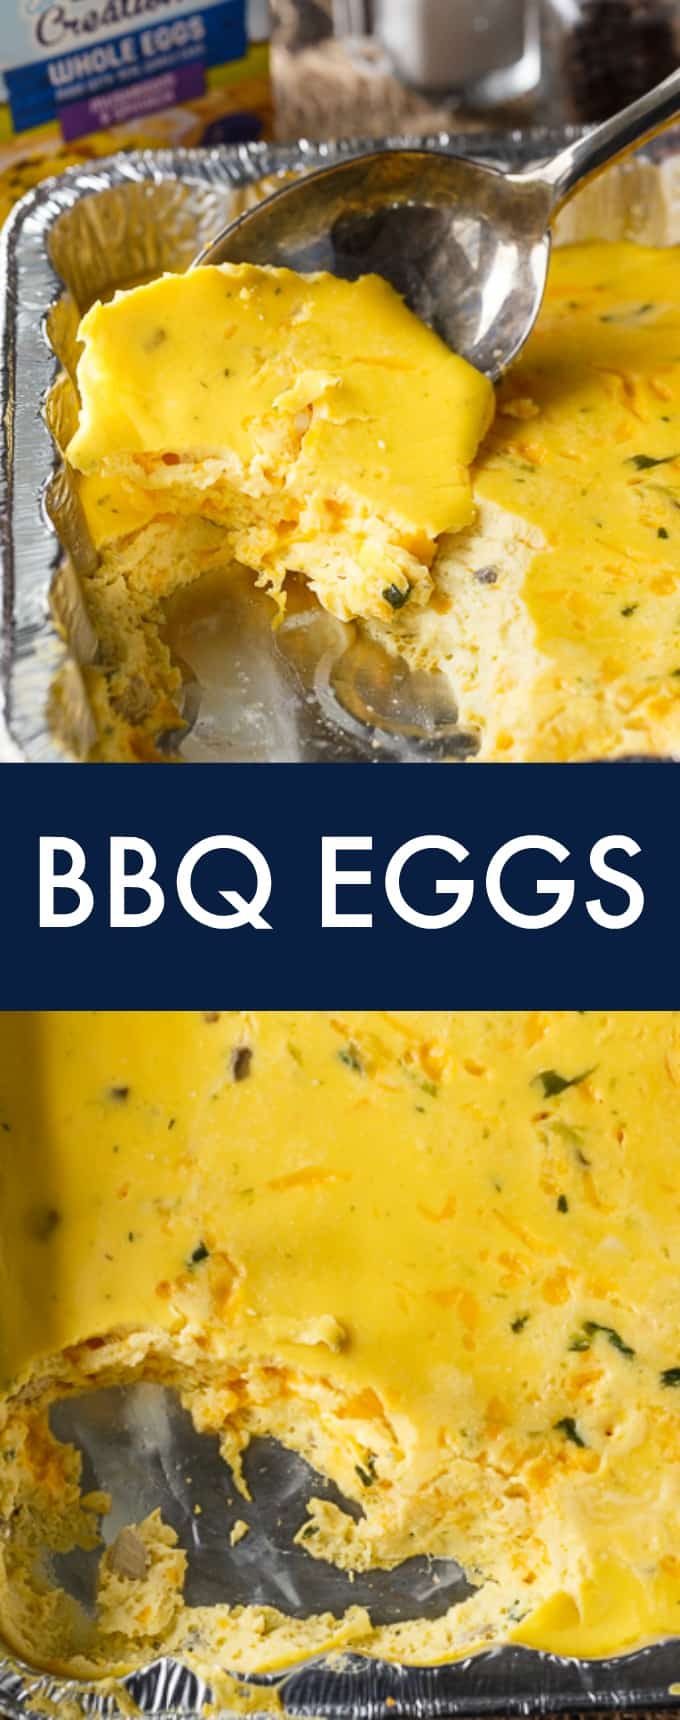 BBQ Eggs - A delicious camping breakfast! So easy to make and tastes delicious. Creamy, cheesy and full of flavour!